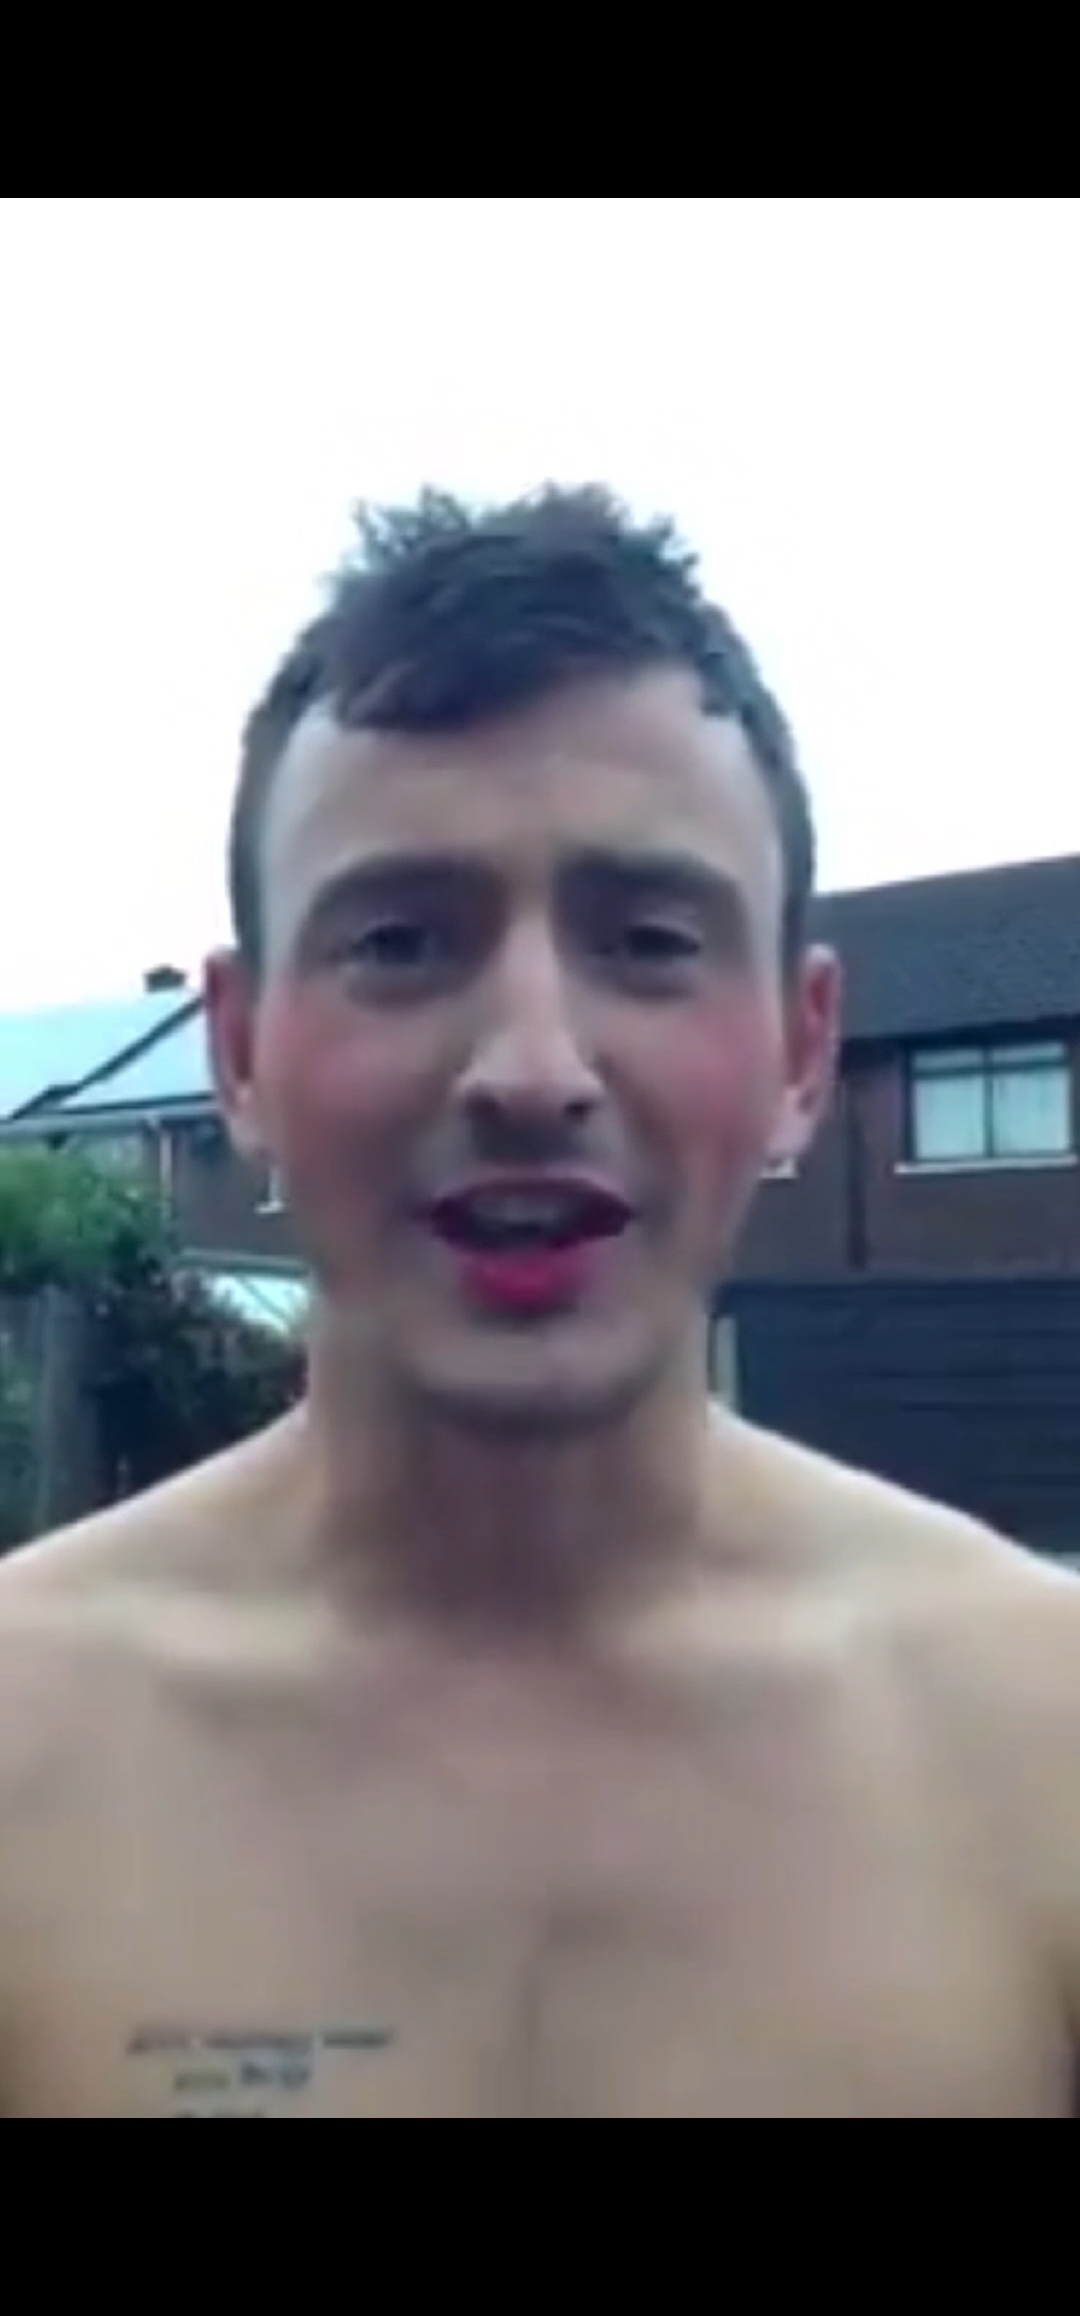 A British lad doing the ice bucket and cock in a sock